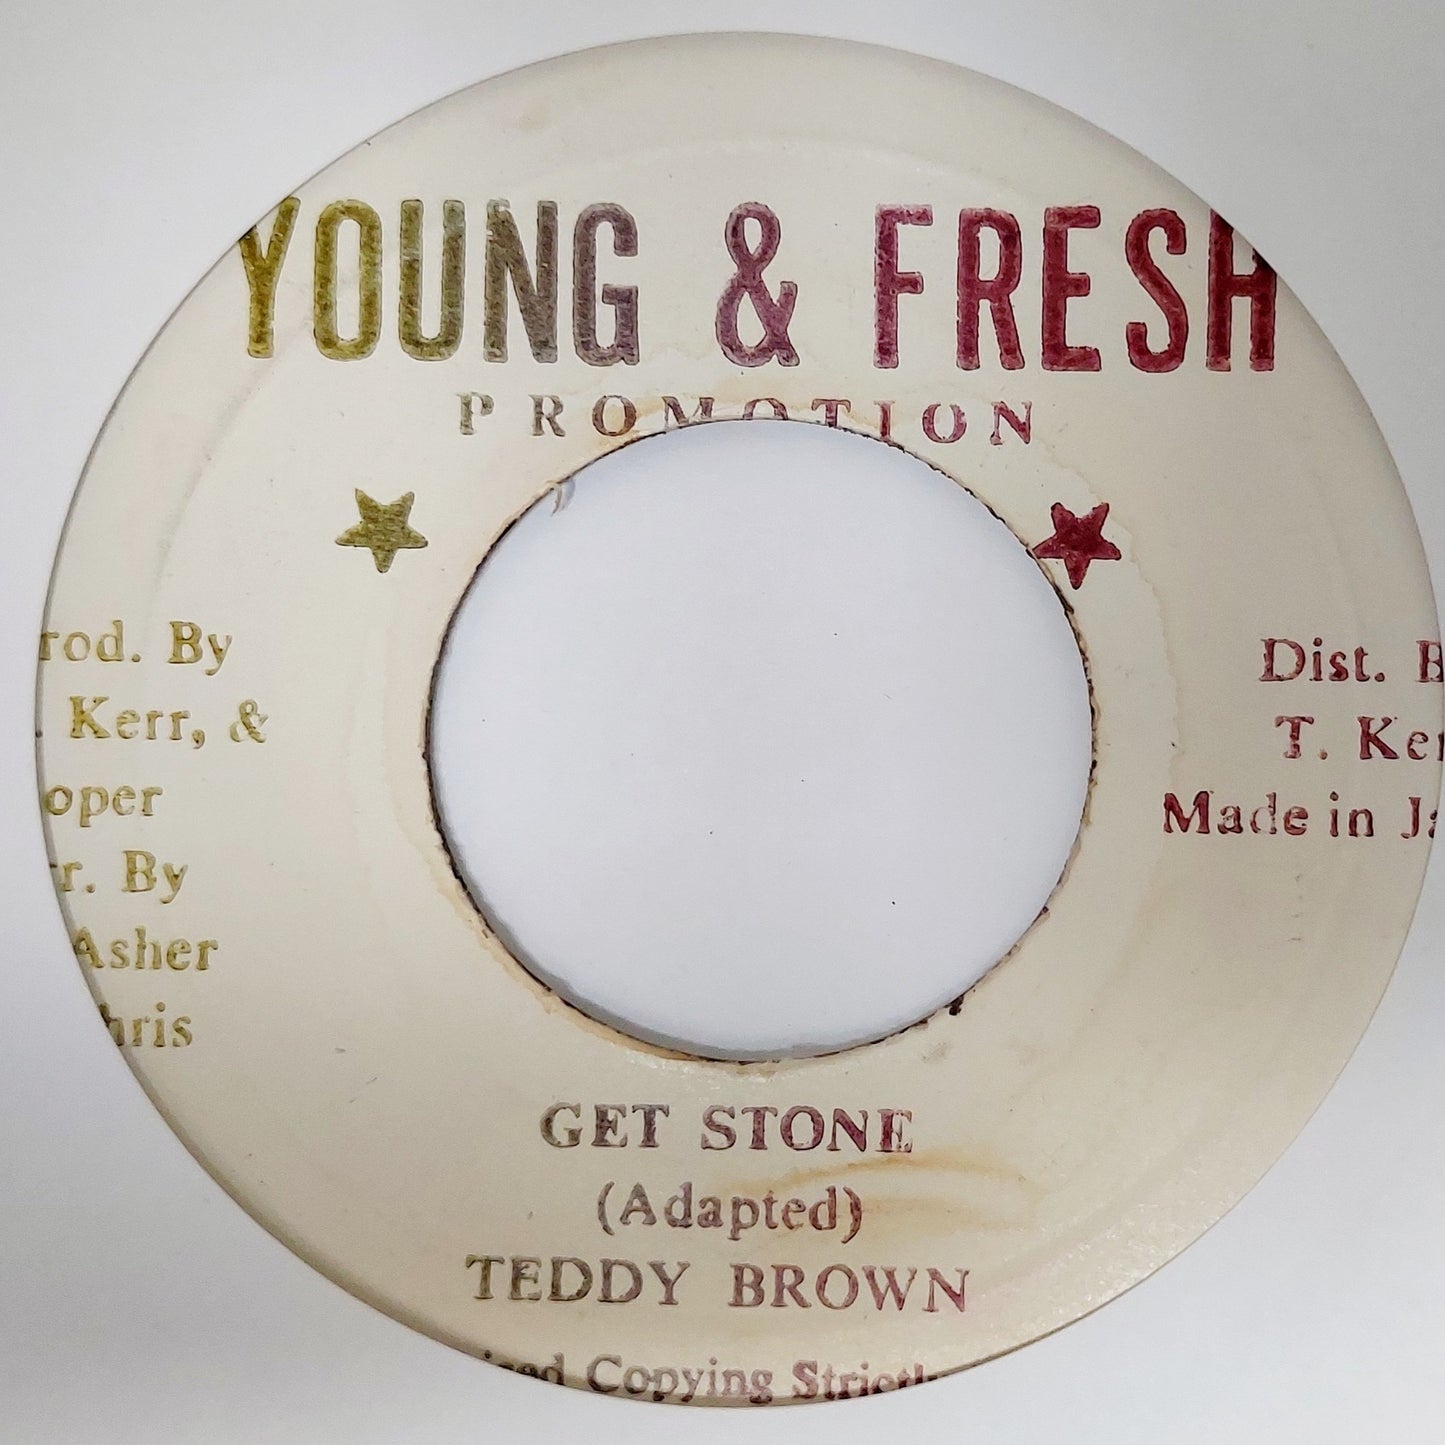 Teddy Brown ‎- Get Stone